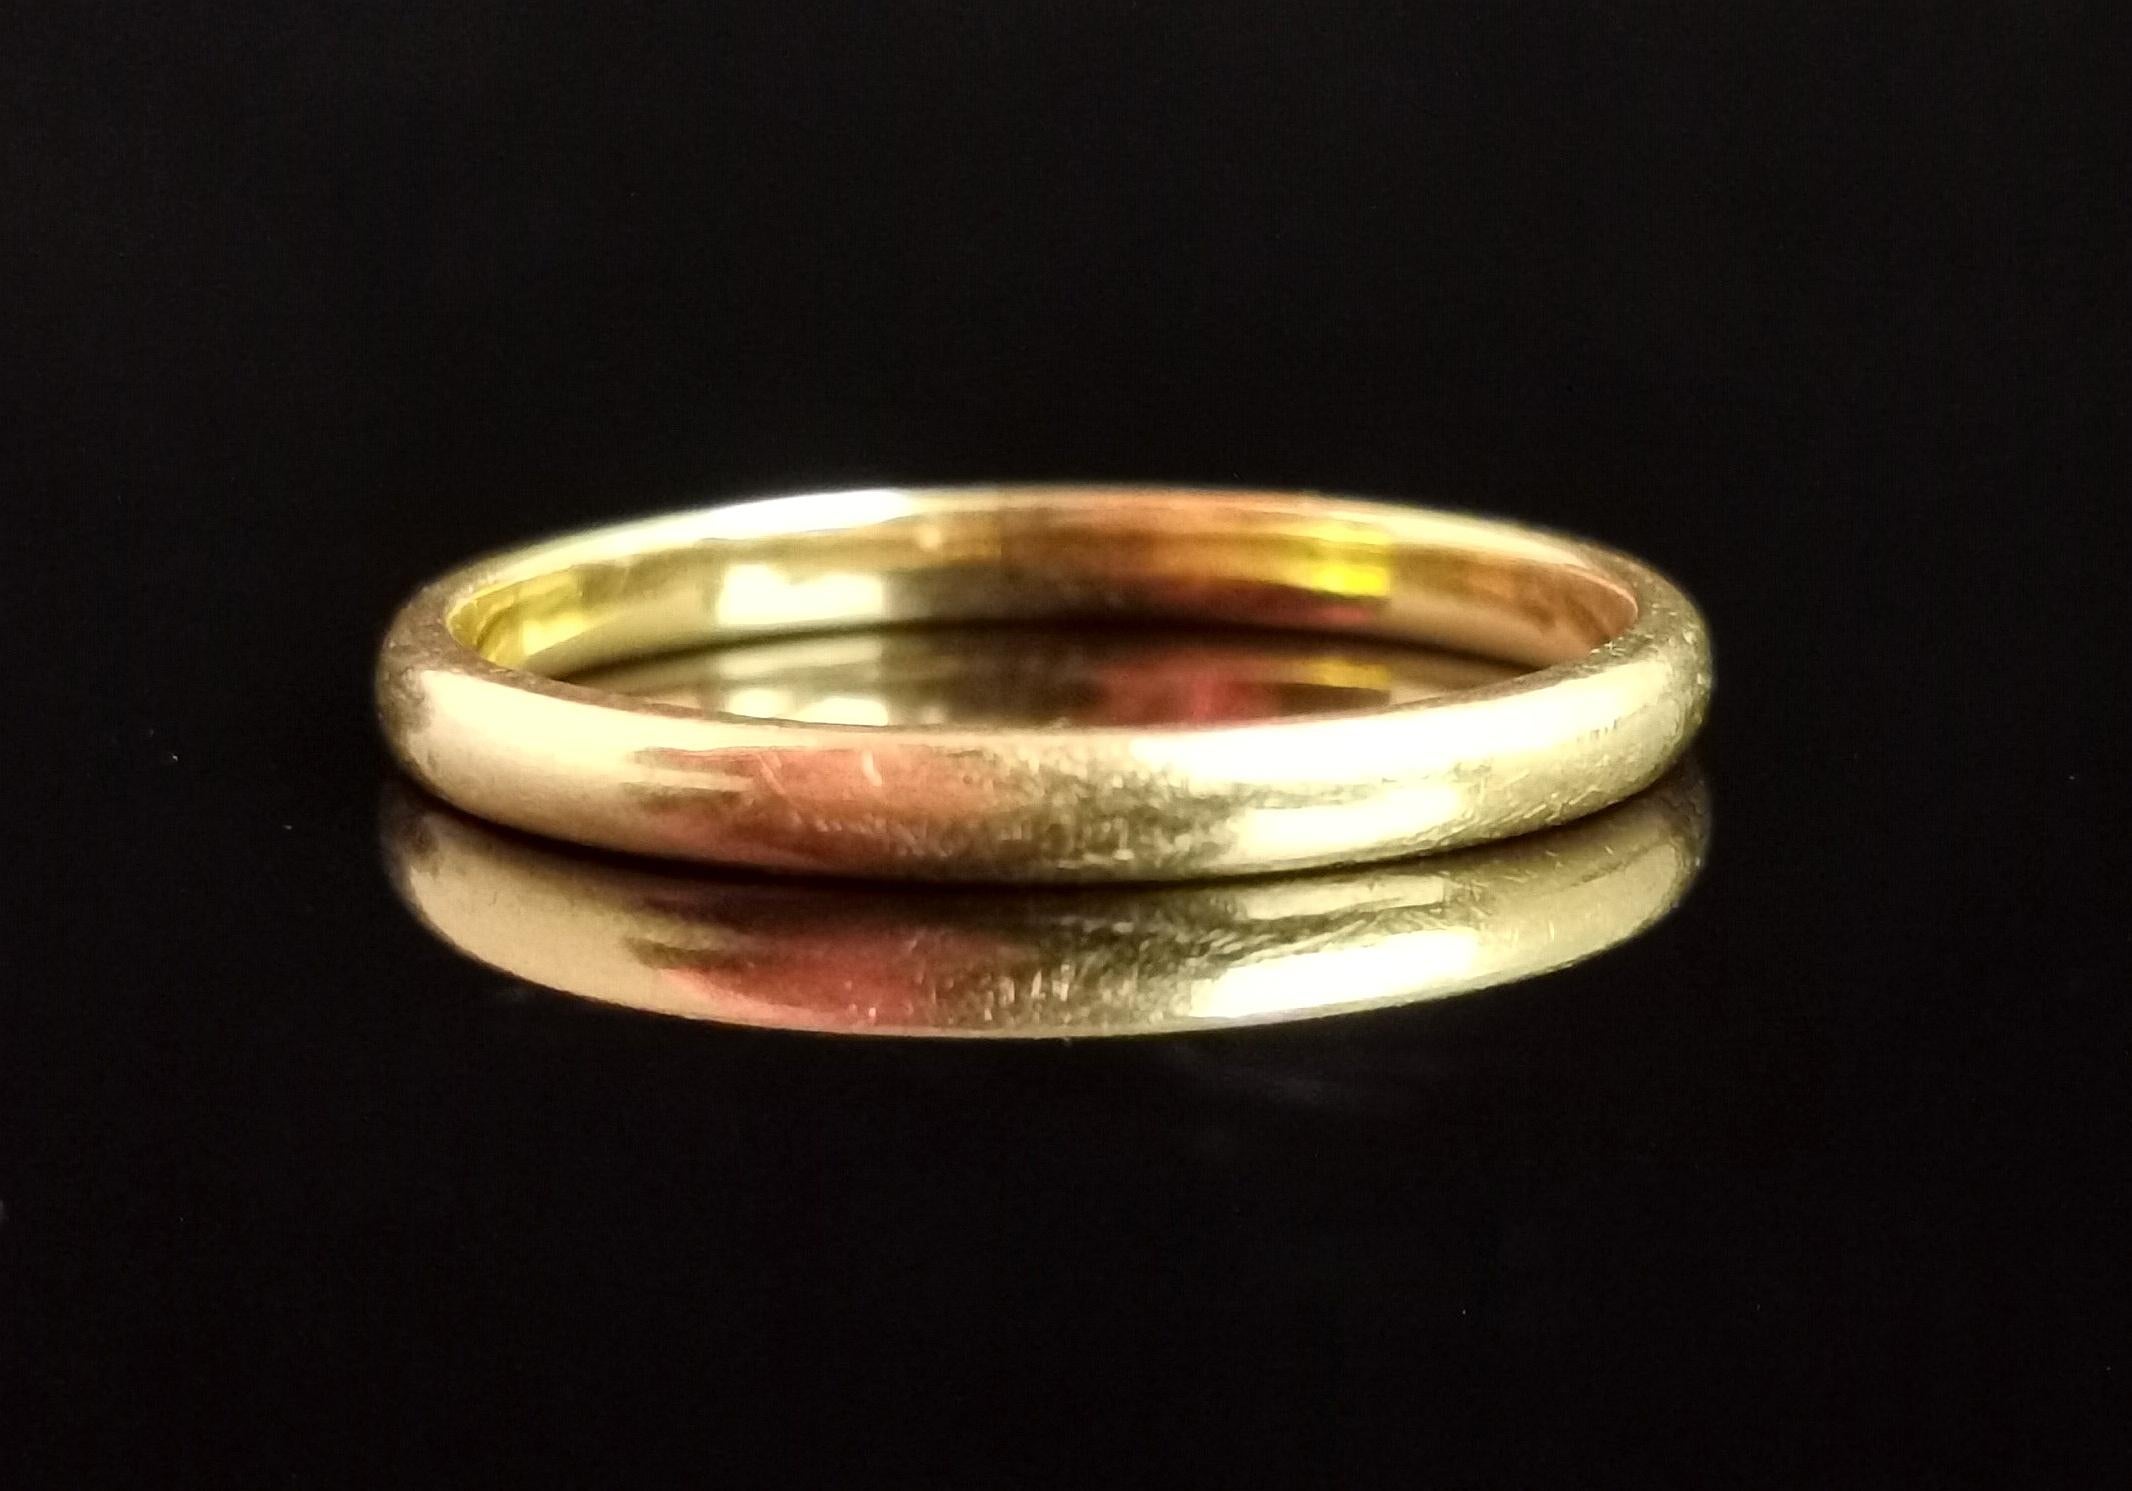 A gorgeous, Art Deco era 22kt gold band ring or wedding ring.

Rich, warm, buttery golden 22kt yellow gold, this lovely hue is only ever found on old gold and it is so rich and unique.

It has a very soft D profile and is a slim band, perfect for